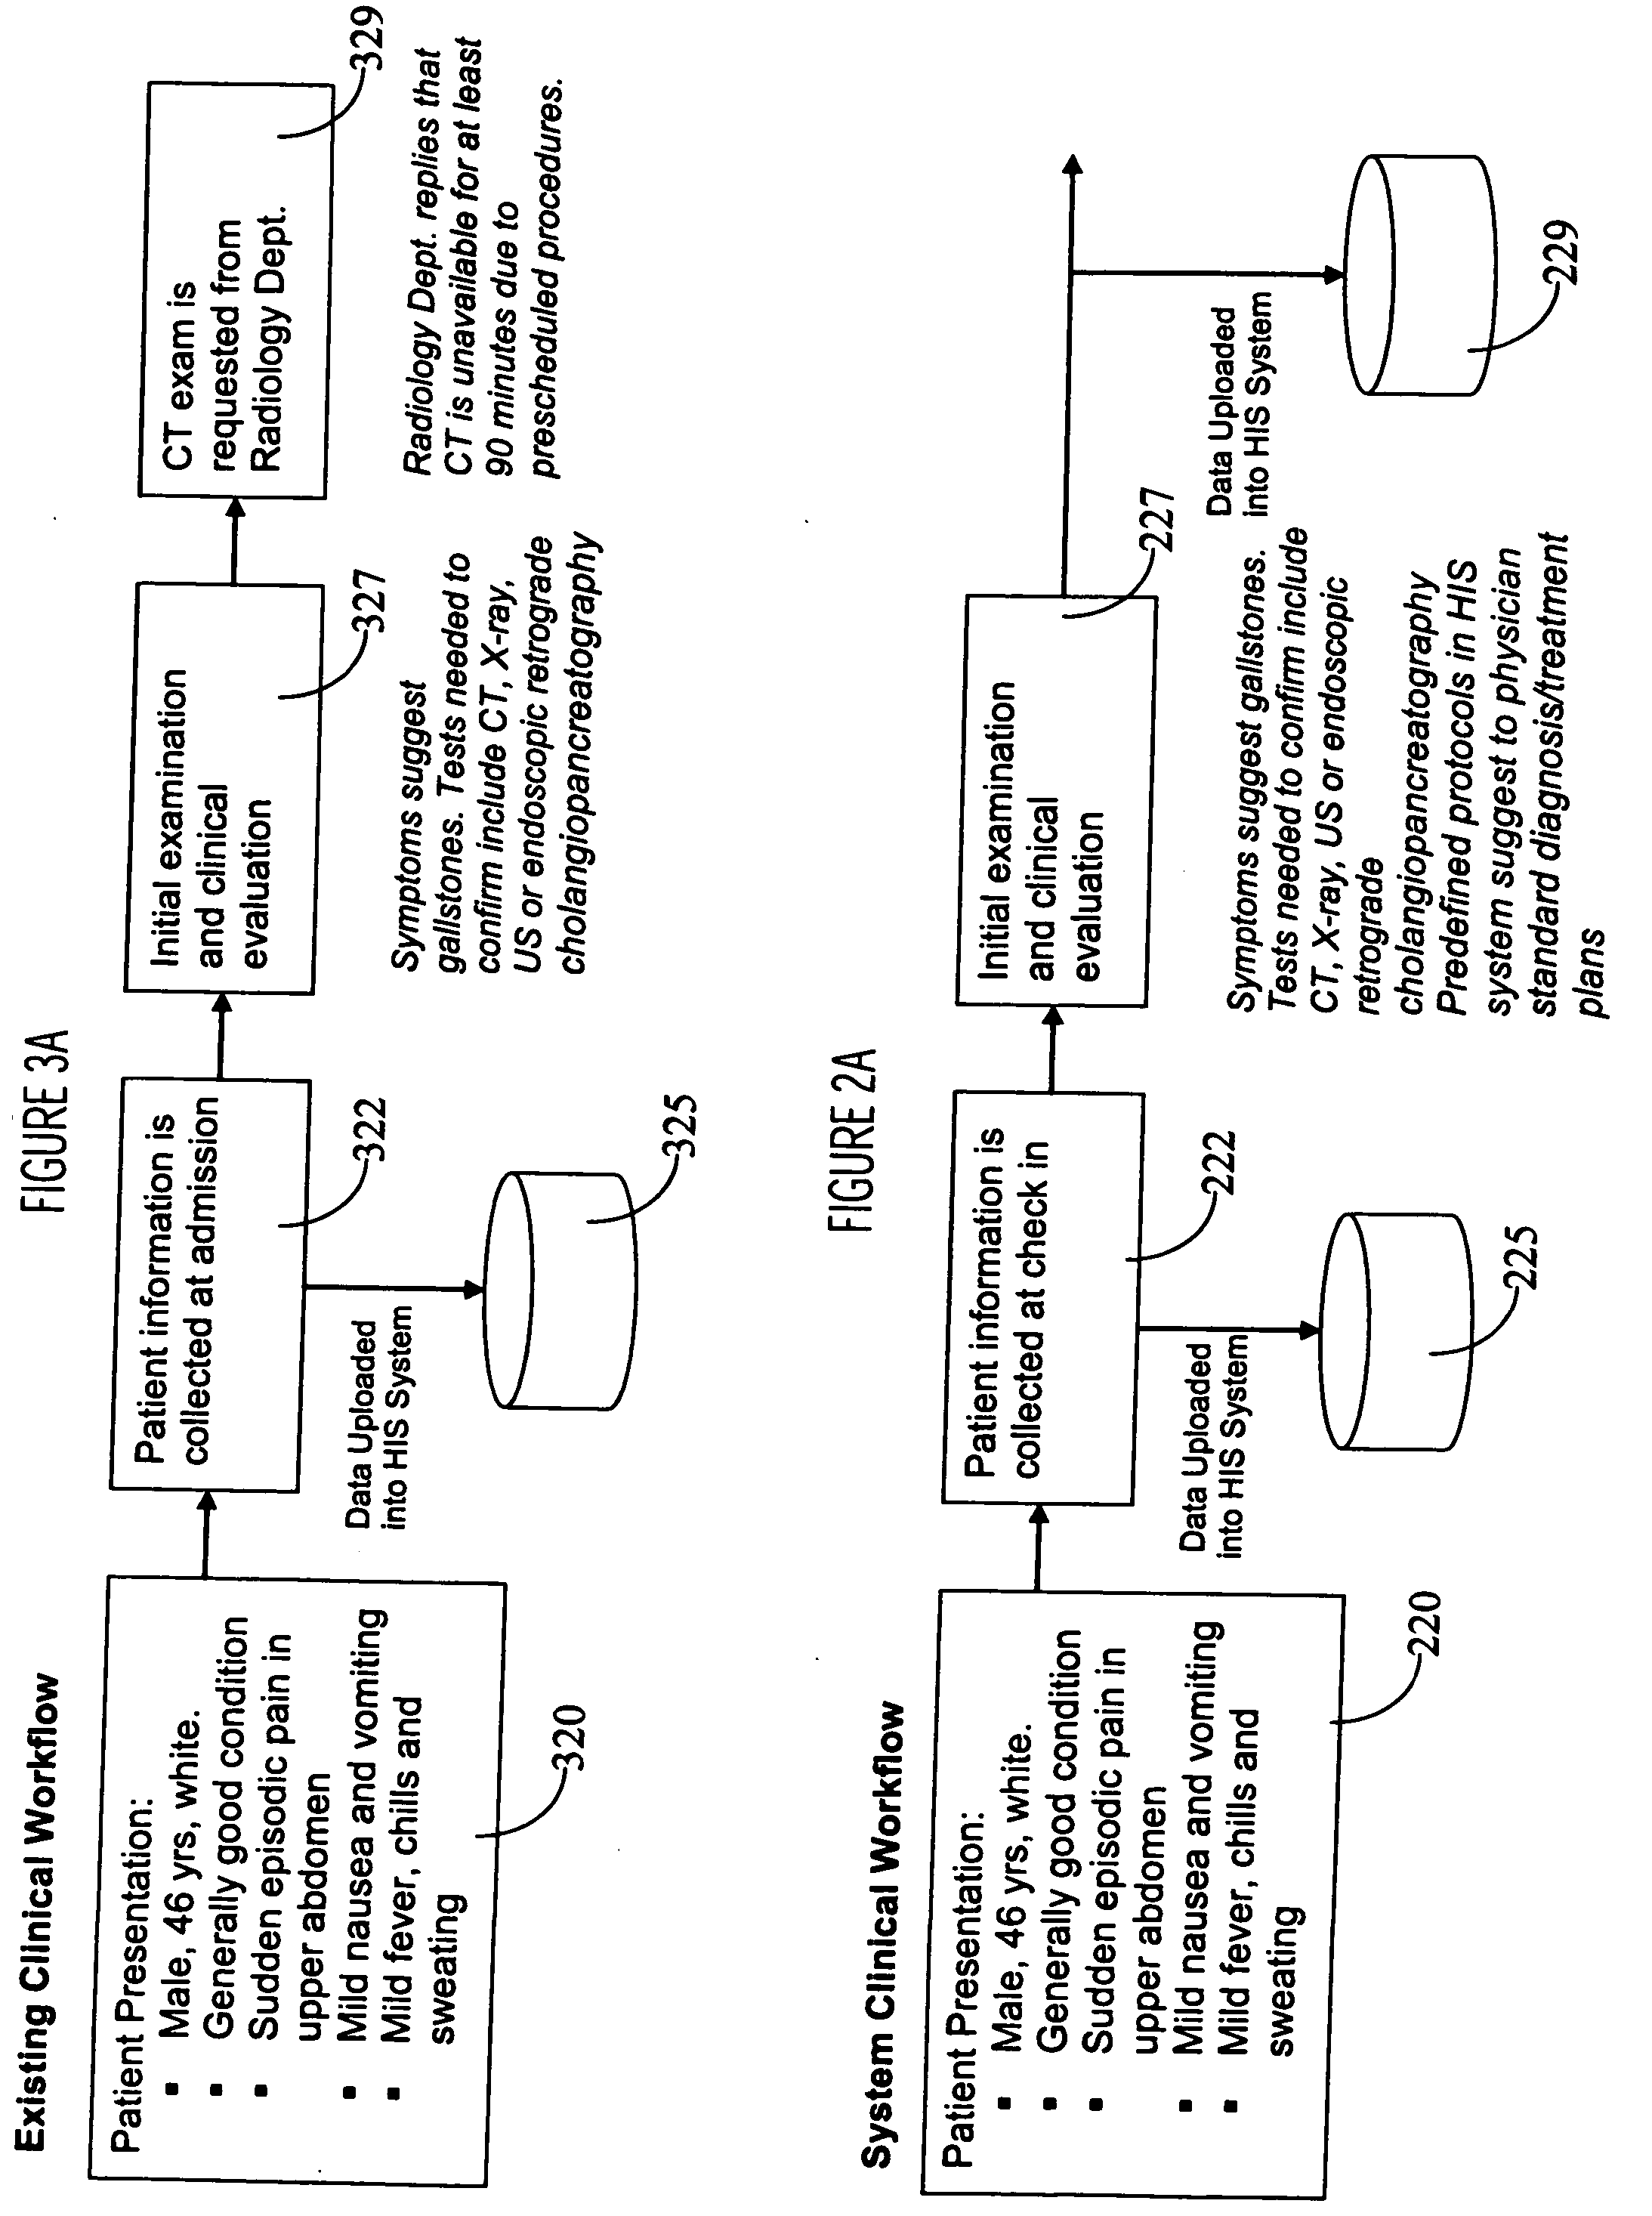 Integrated medical device and healthcare information system